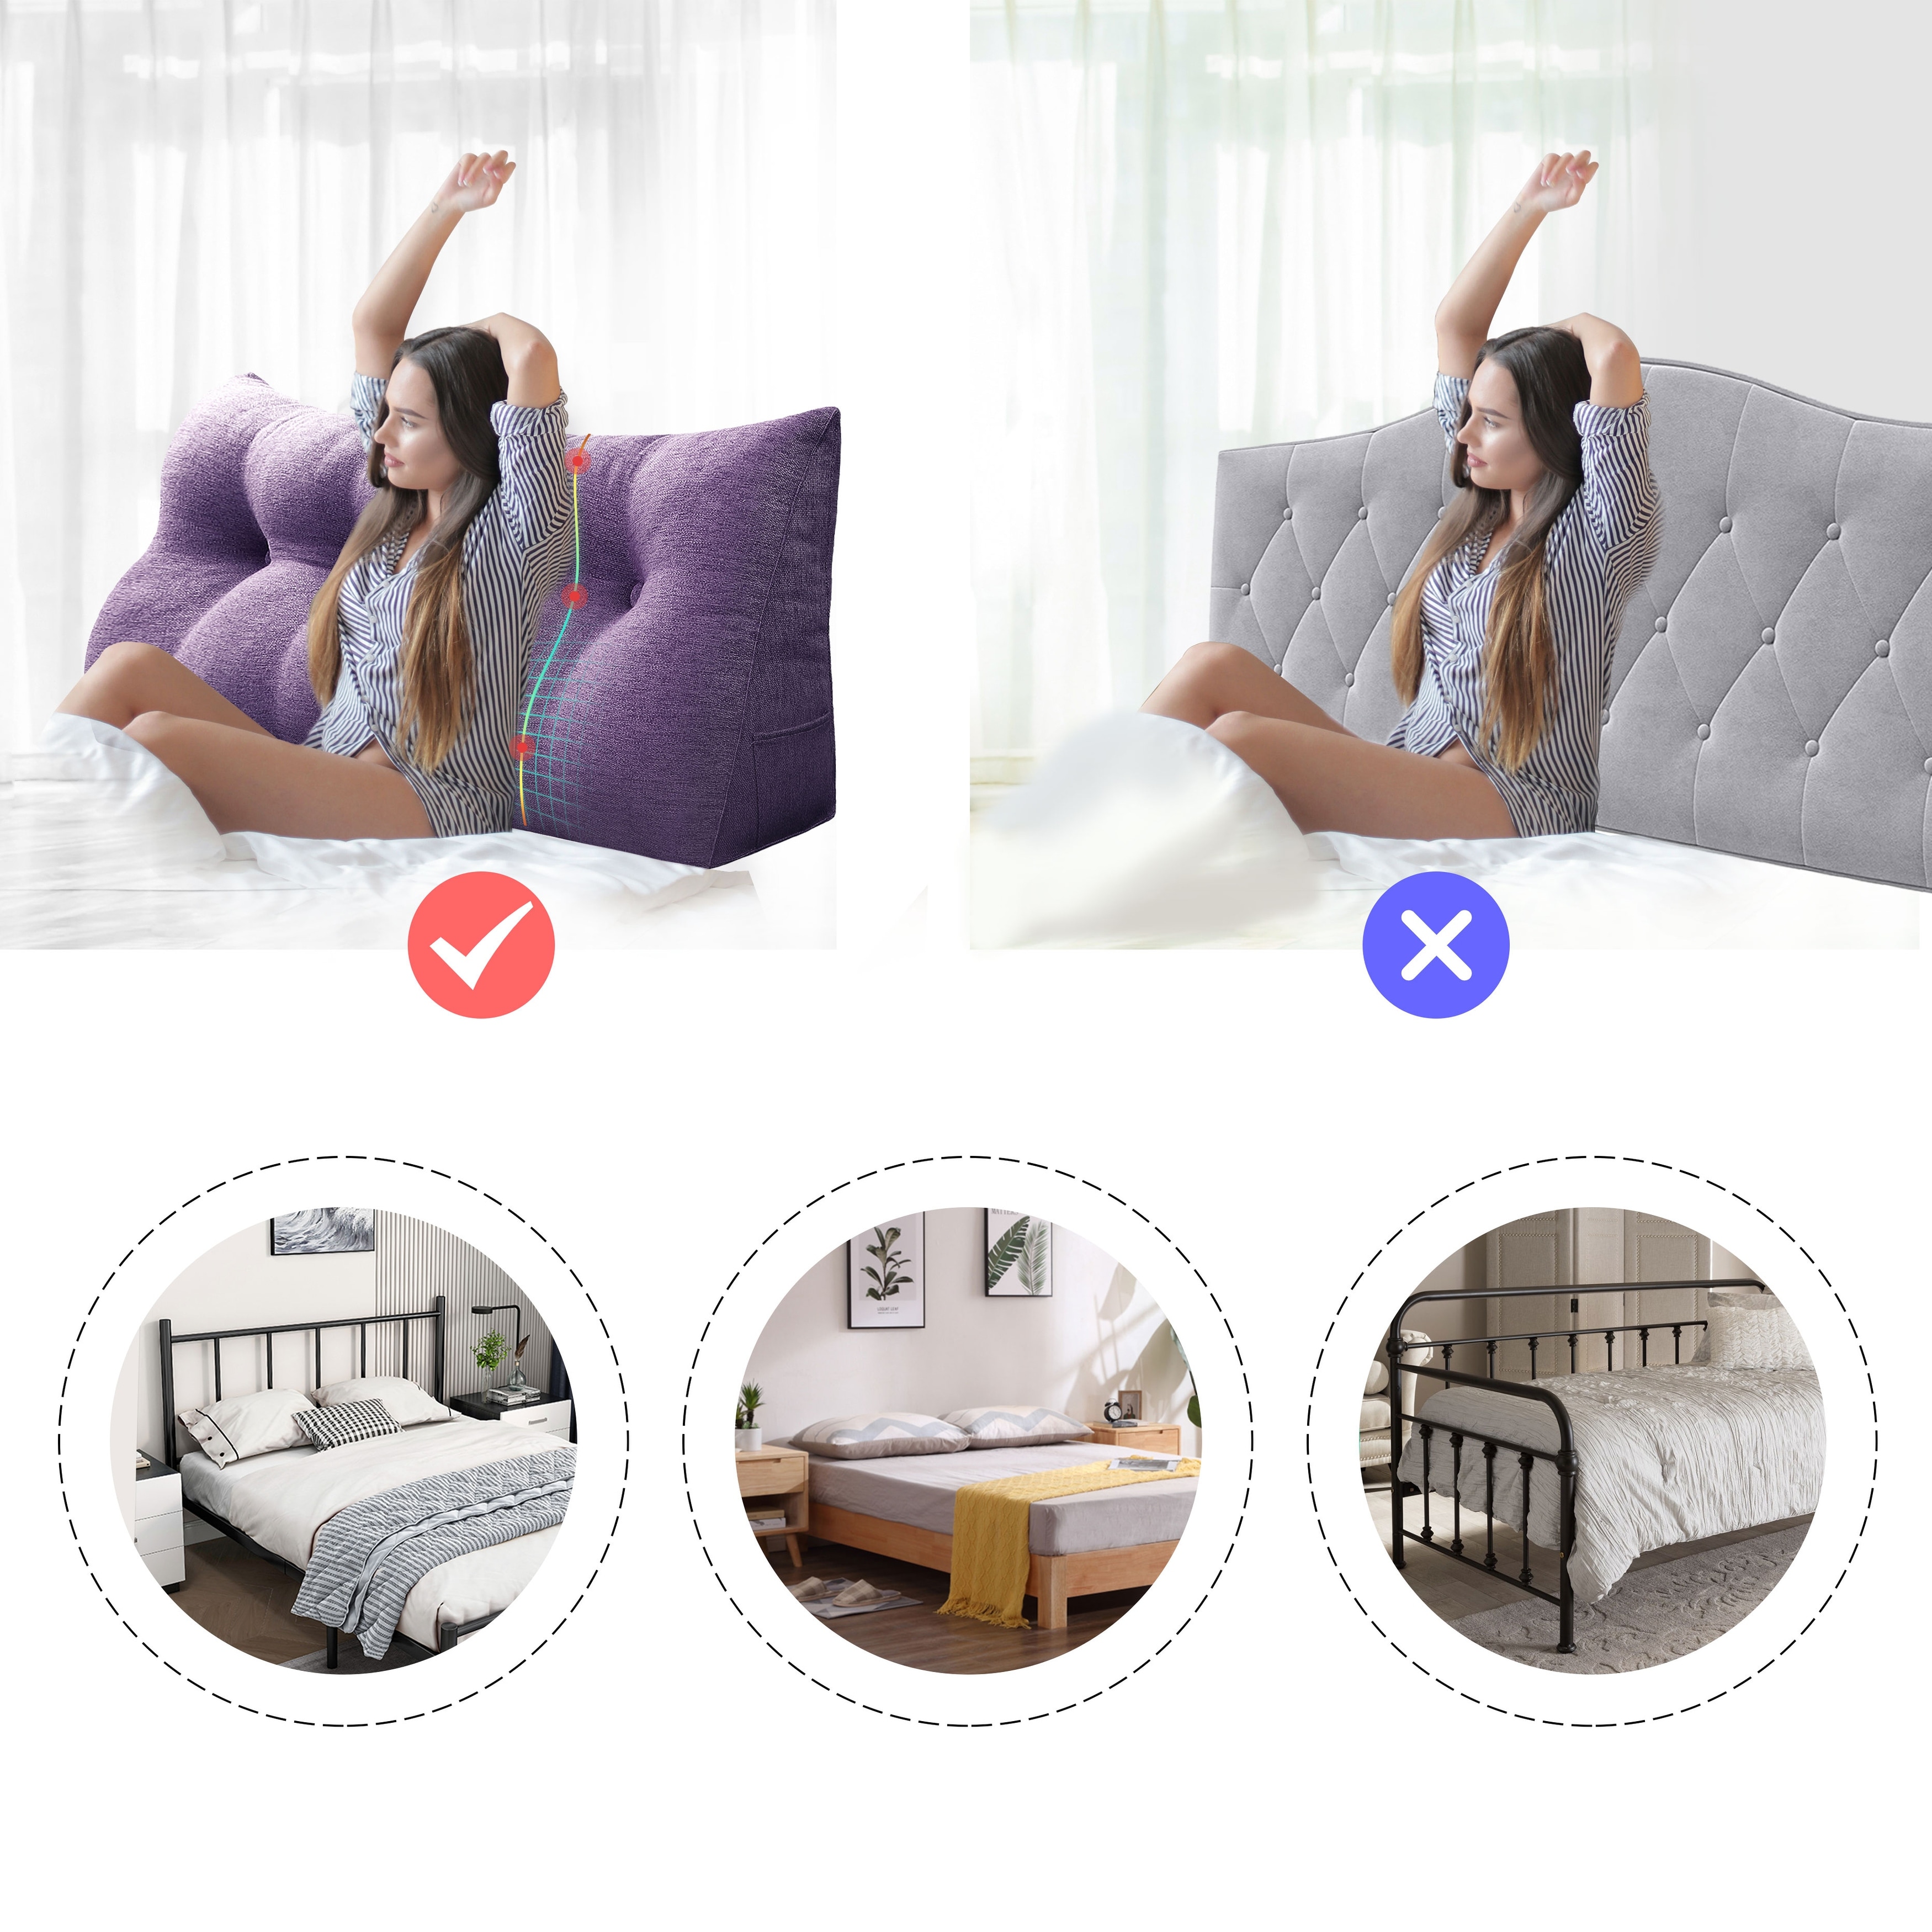 https://ak1.ostkcdn.com/images/products/is/images/direct/de26eca37b5d09021991d2147244bb46ca5b1cfa/WOWMAX-Bed-Rest-Wedge-Pillow-Headboard-Reading-Cushion-TV-Watching-Support.jpg